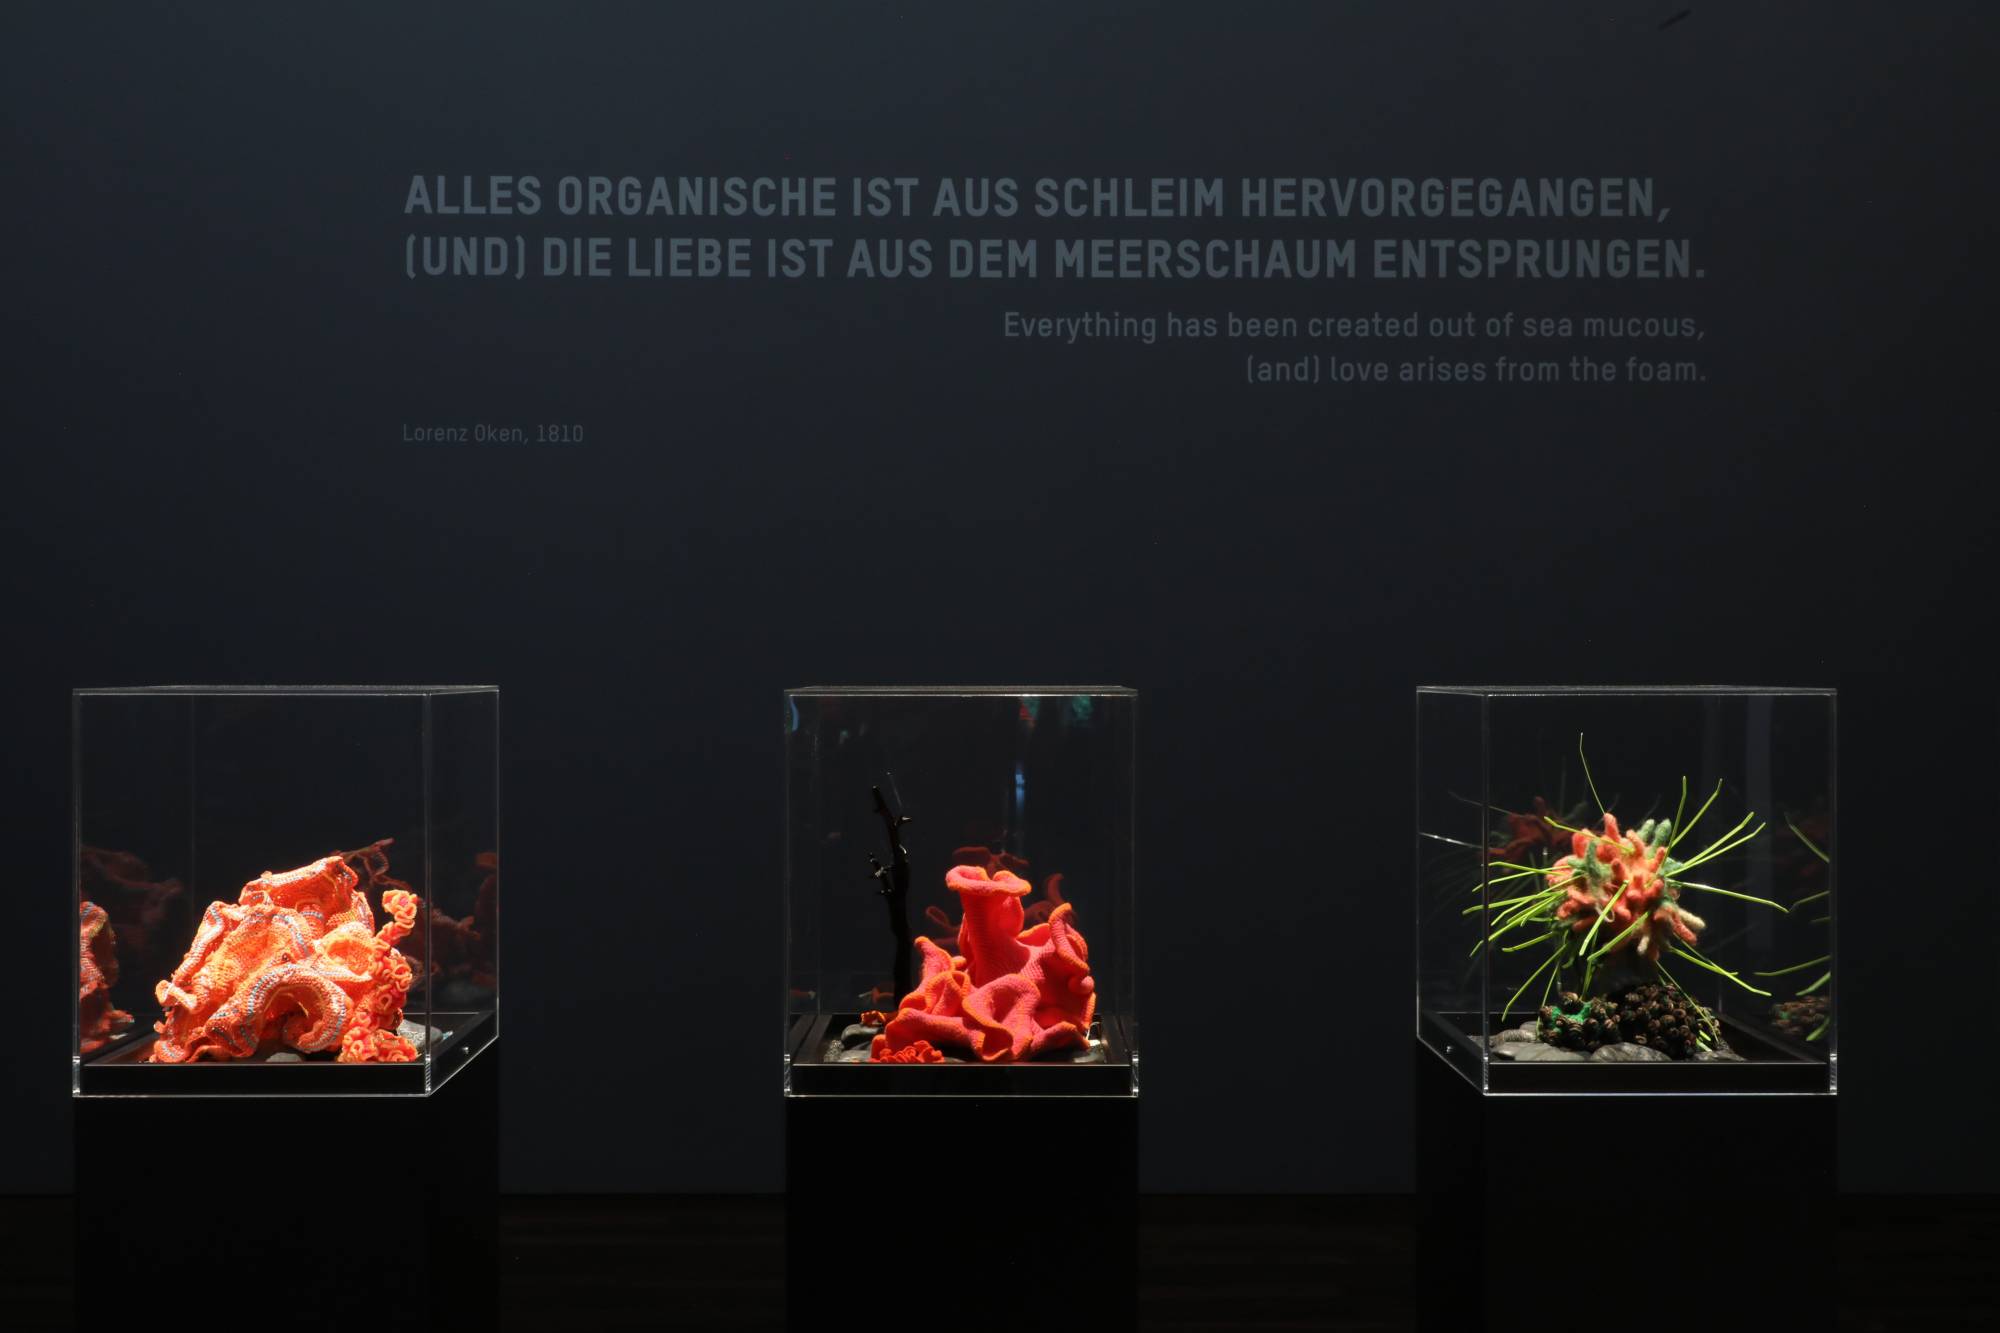 crochet and beaded corals in vitrines in a gallery